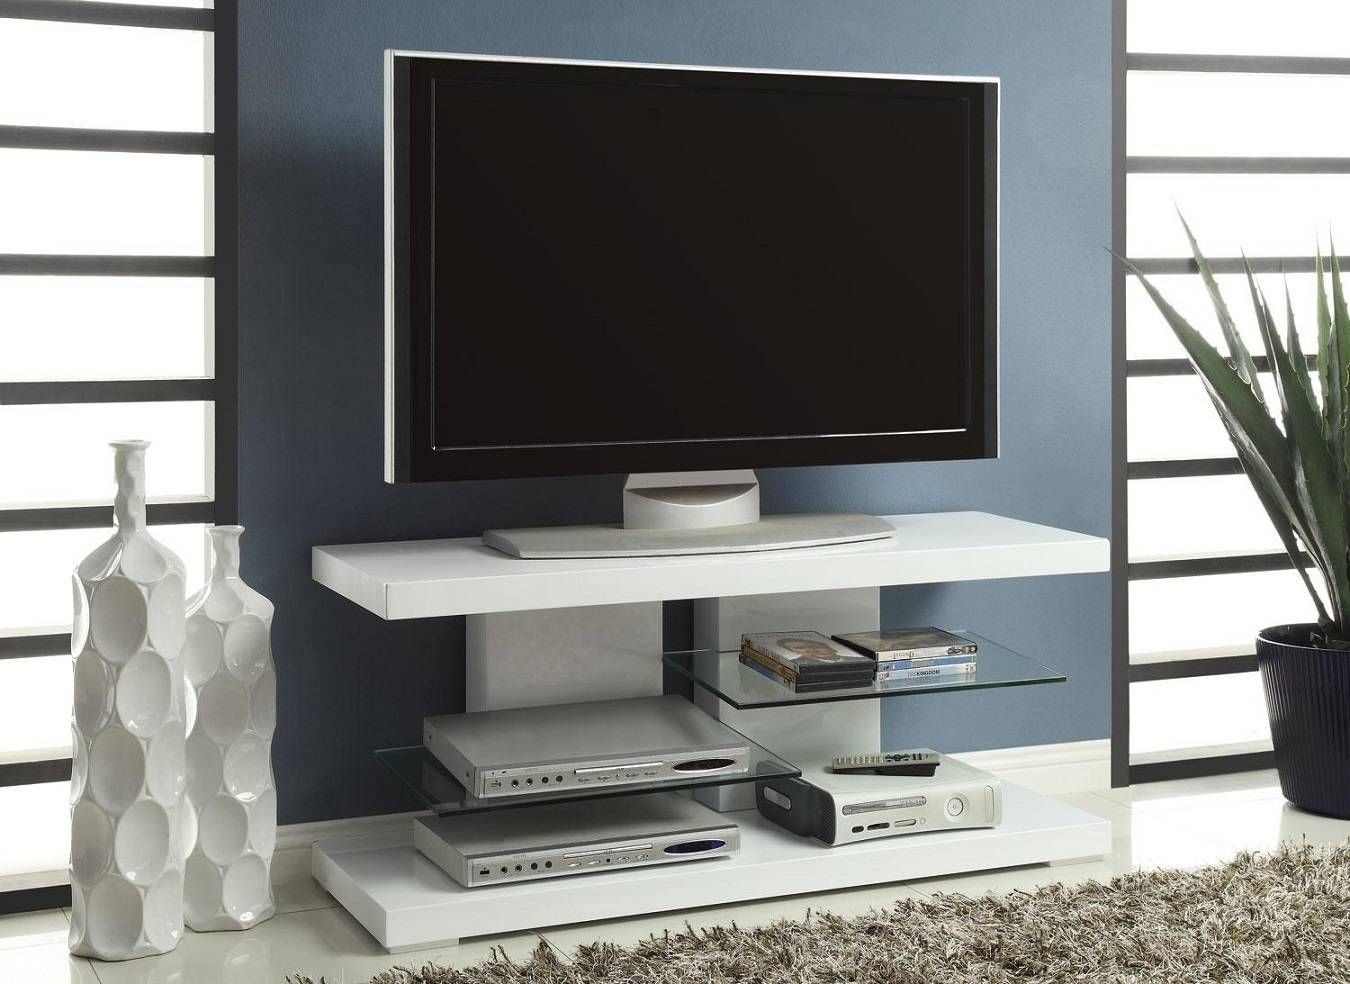 White Painted Plywood Flat Screen Tv Stand With Tempered Glass Within Modern Tv Cabinets For Flat Screens (View 15 of 15)